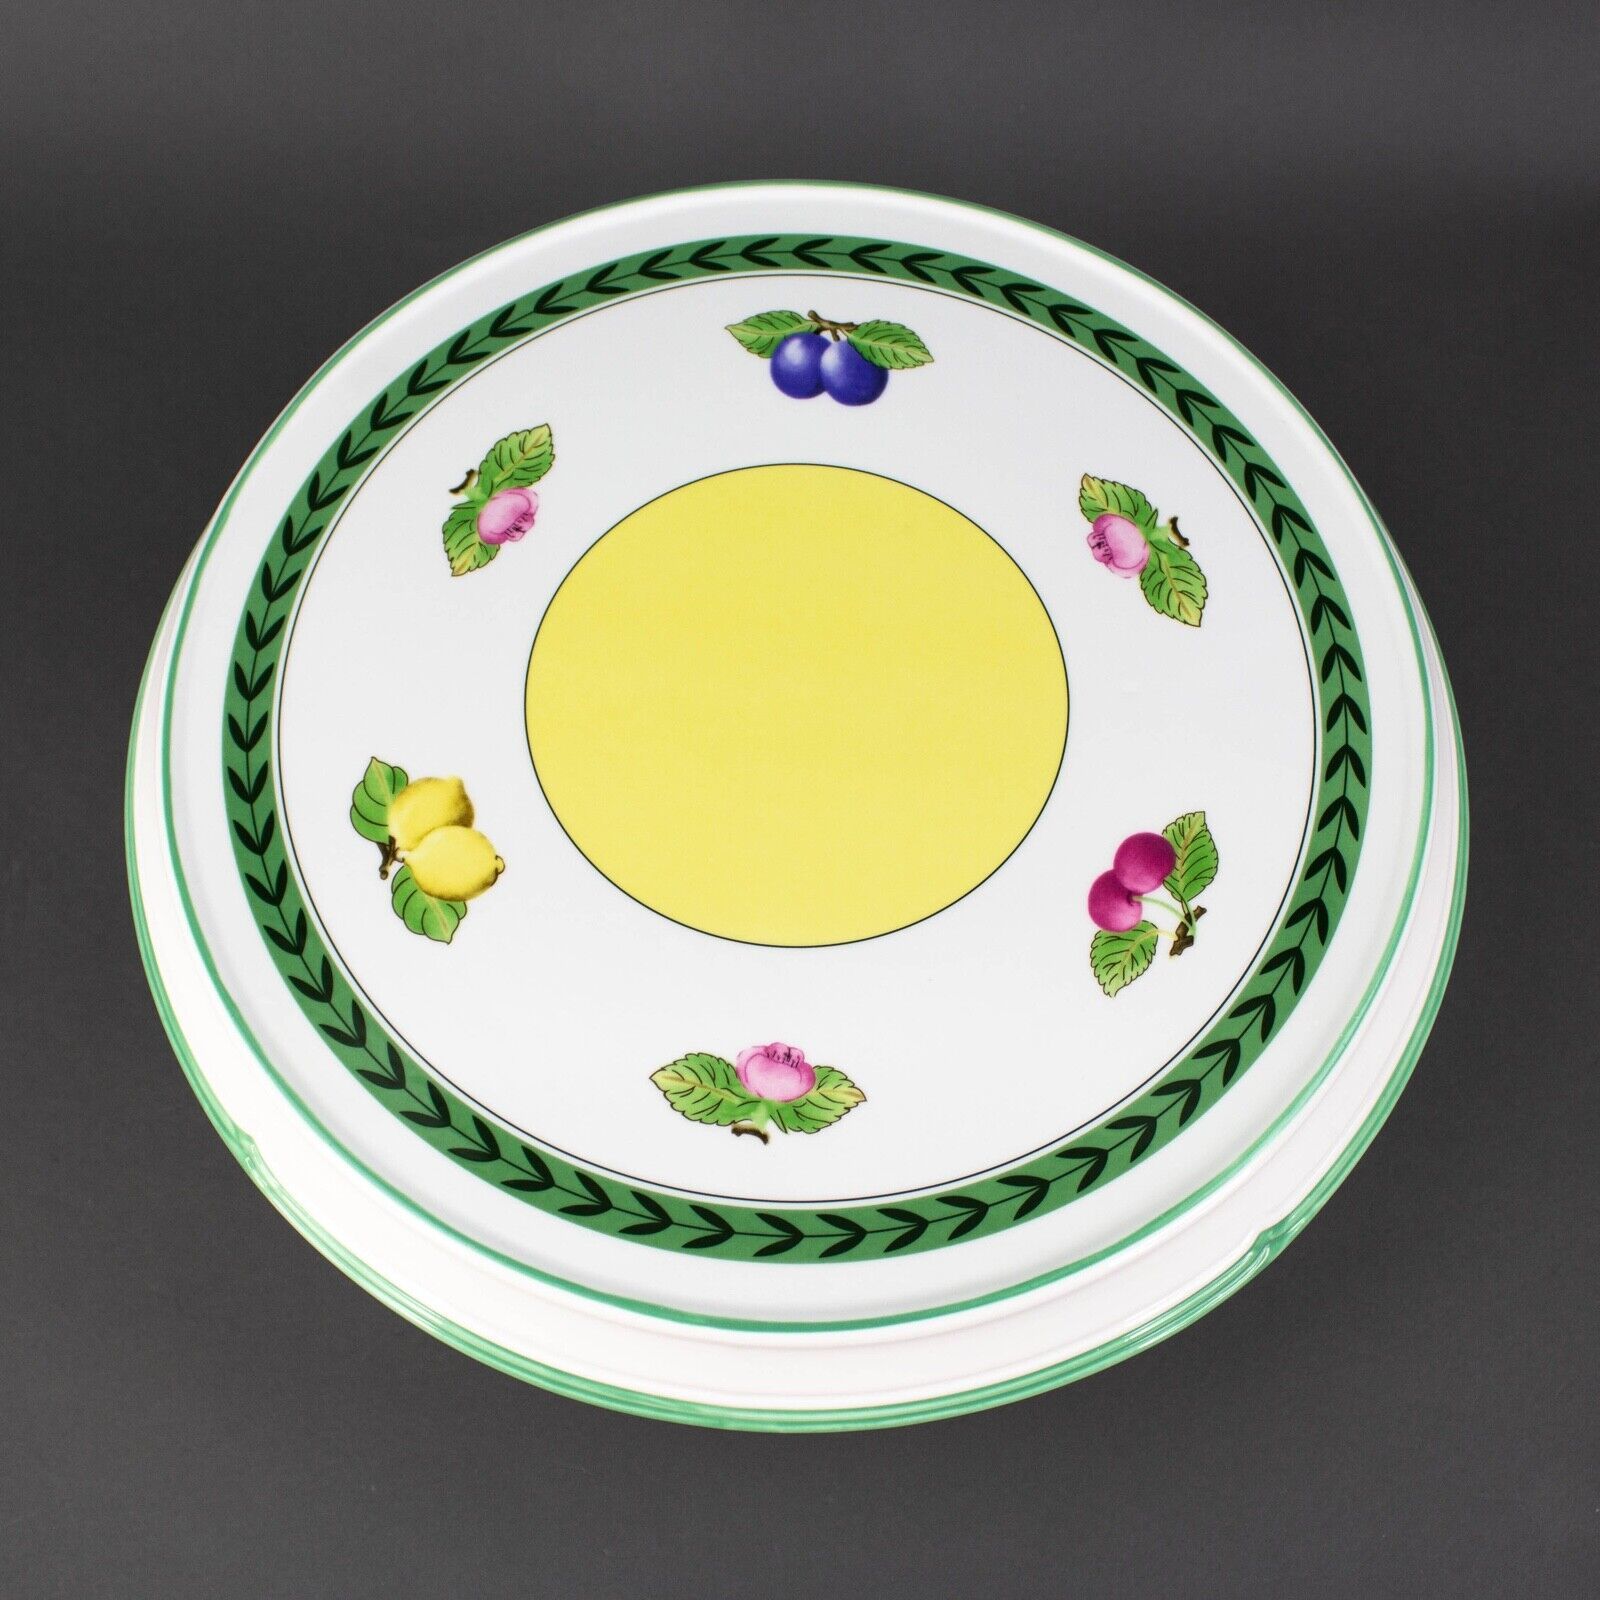 Primary image for Villeroy & Boch French Garden Fleurence Pedestal Cake Stand Plate Large 14 1/2"